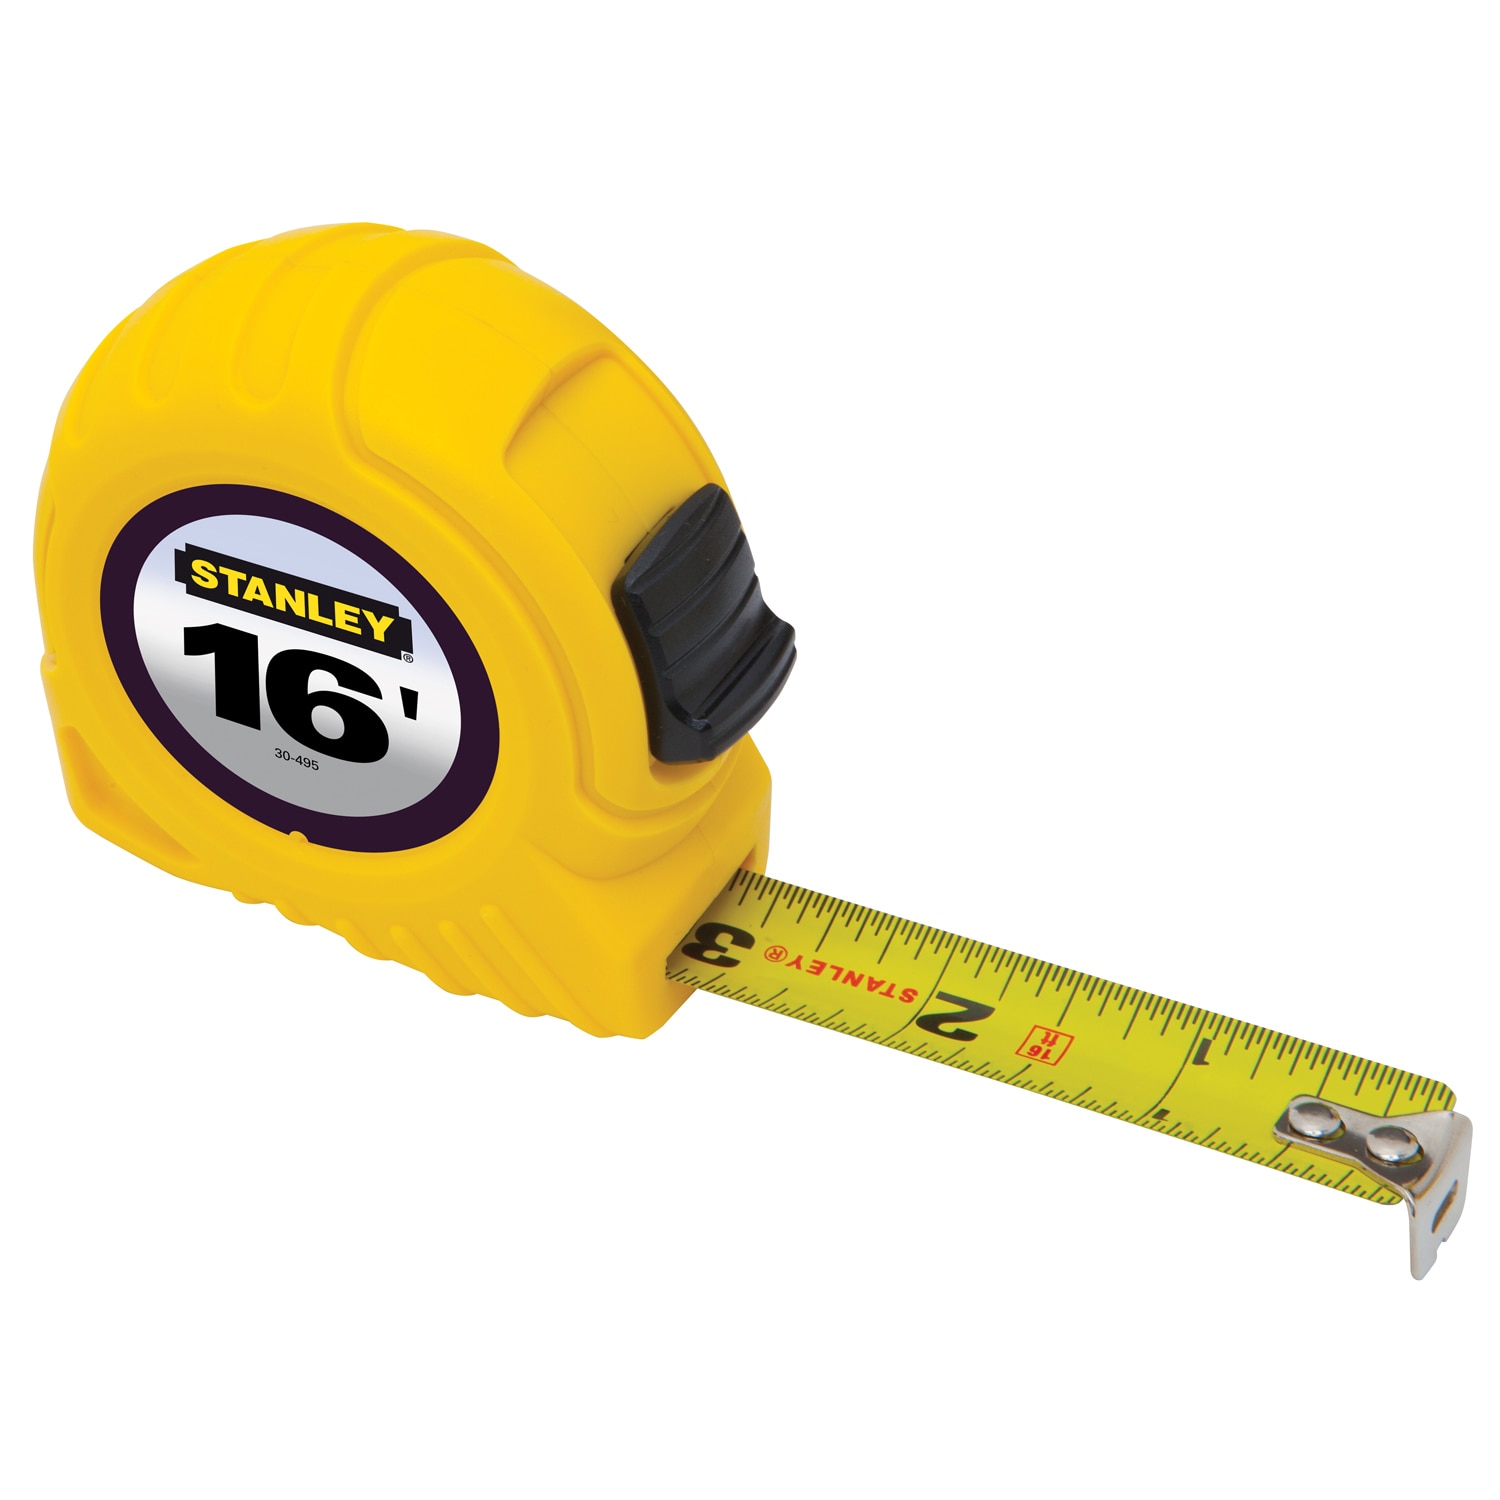 Hand Tools Buy Measures & Levels, Wrenches, & Hammers